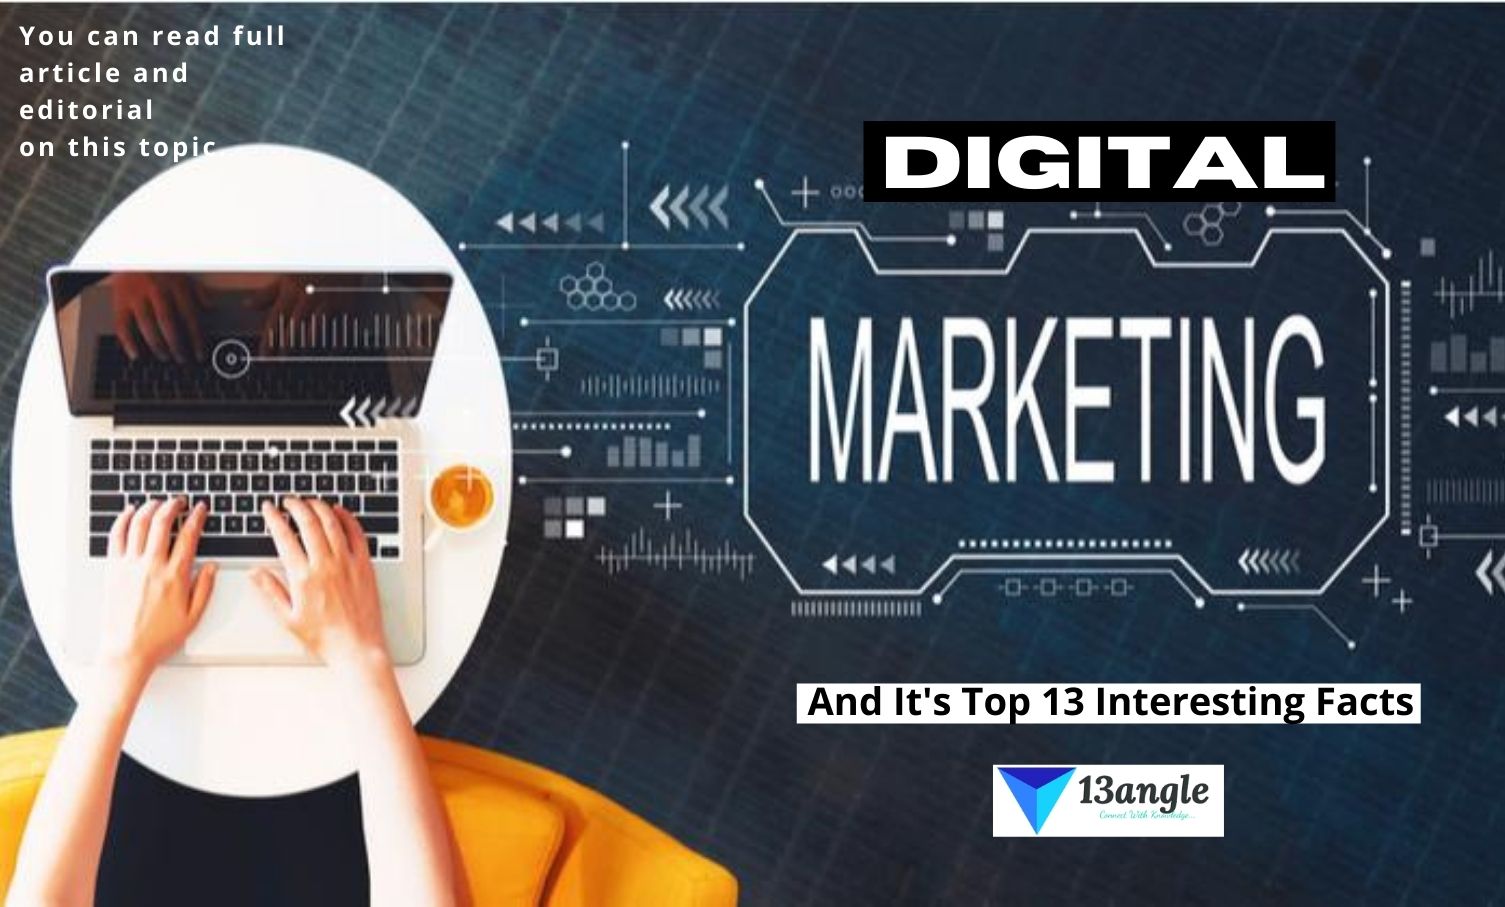 Digital Marketing And It's Top 13 Interesting Facts- 13angle.com